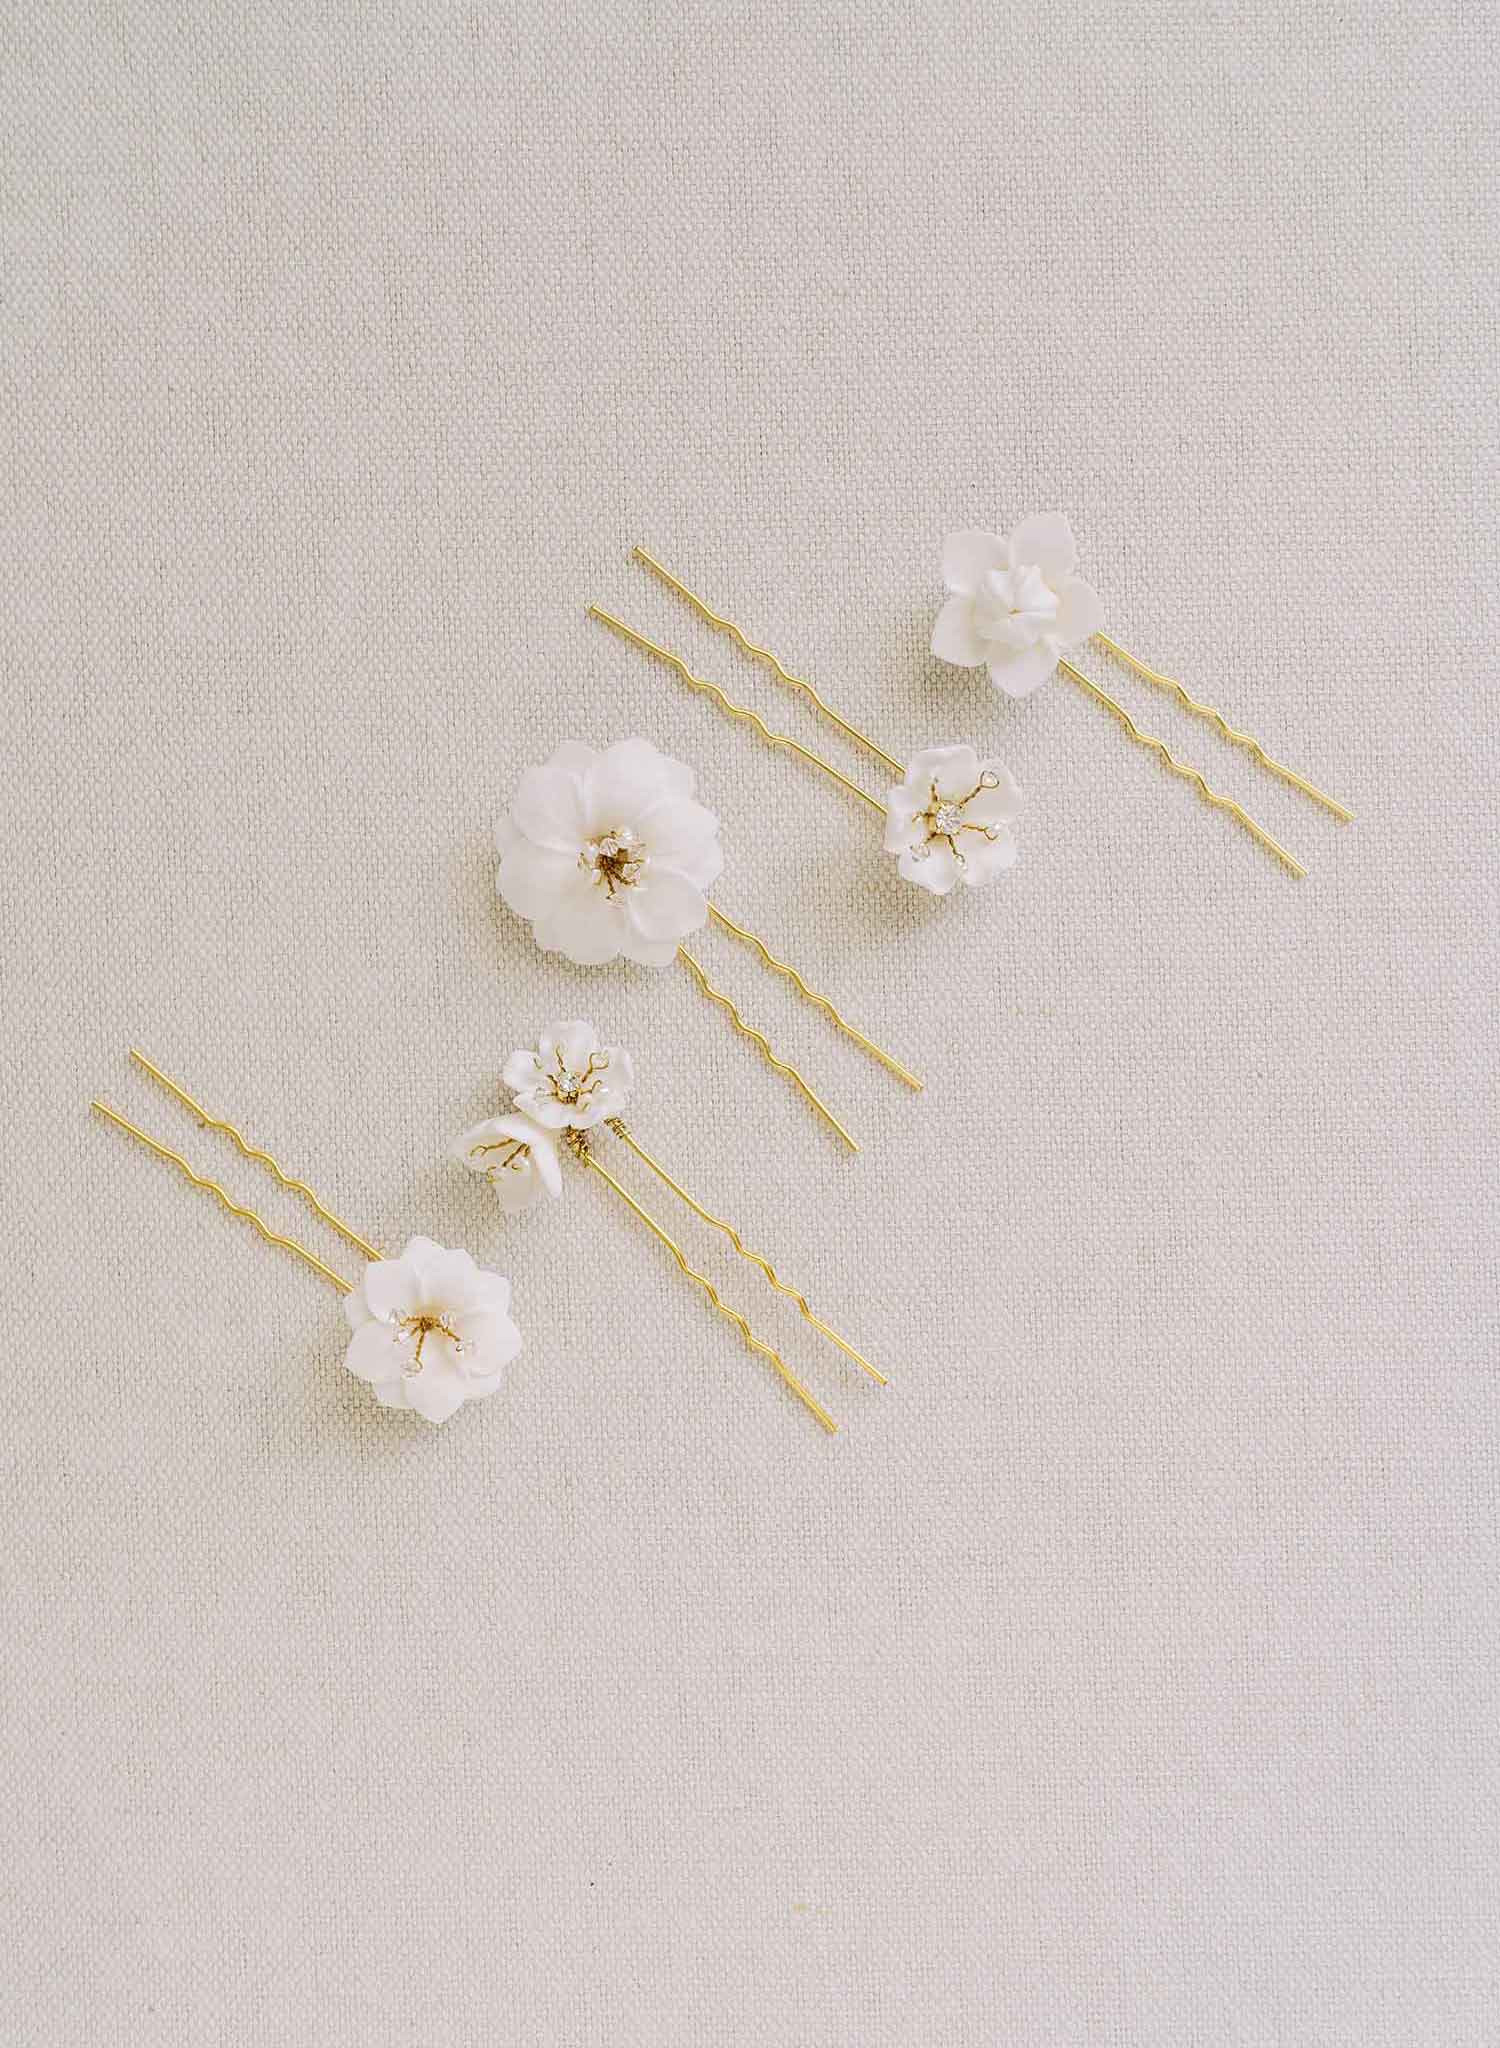 Hand sculpted simple blossom hair pin set of 5 - Style #2153